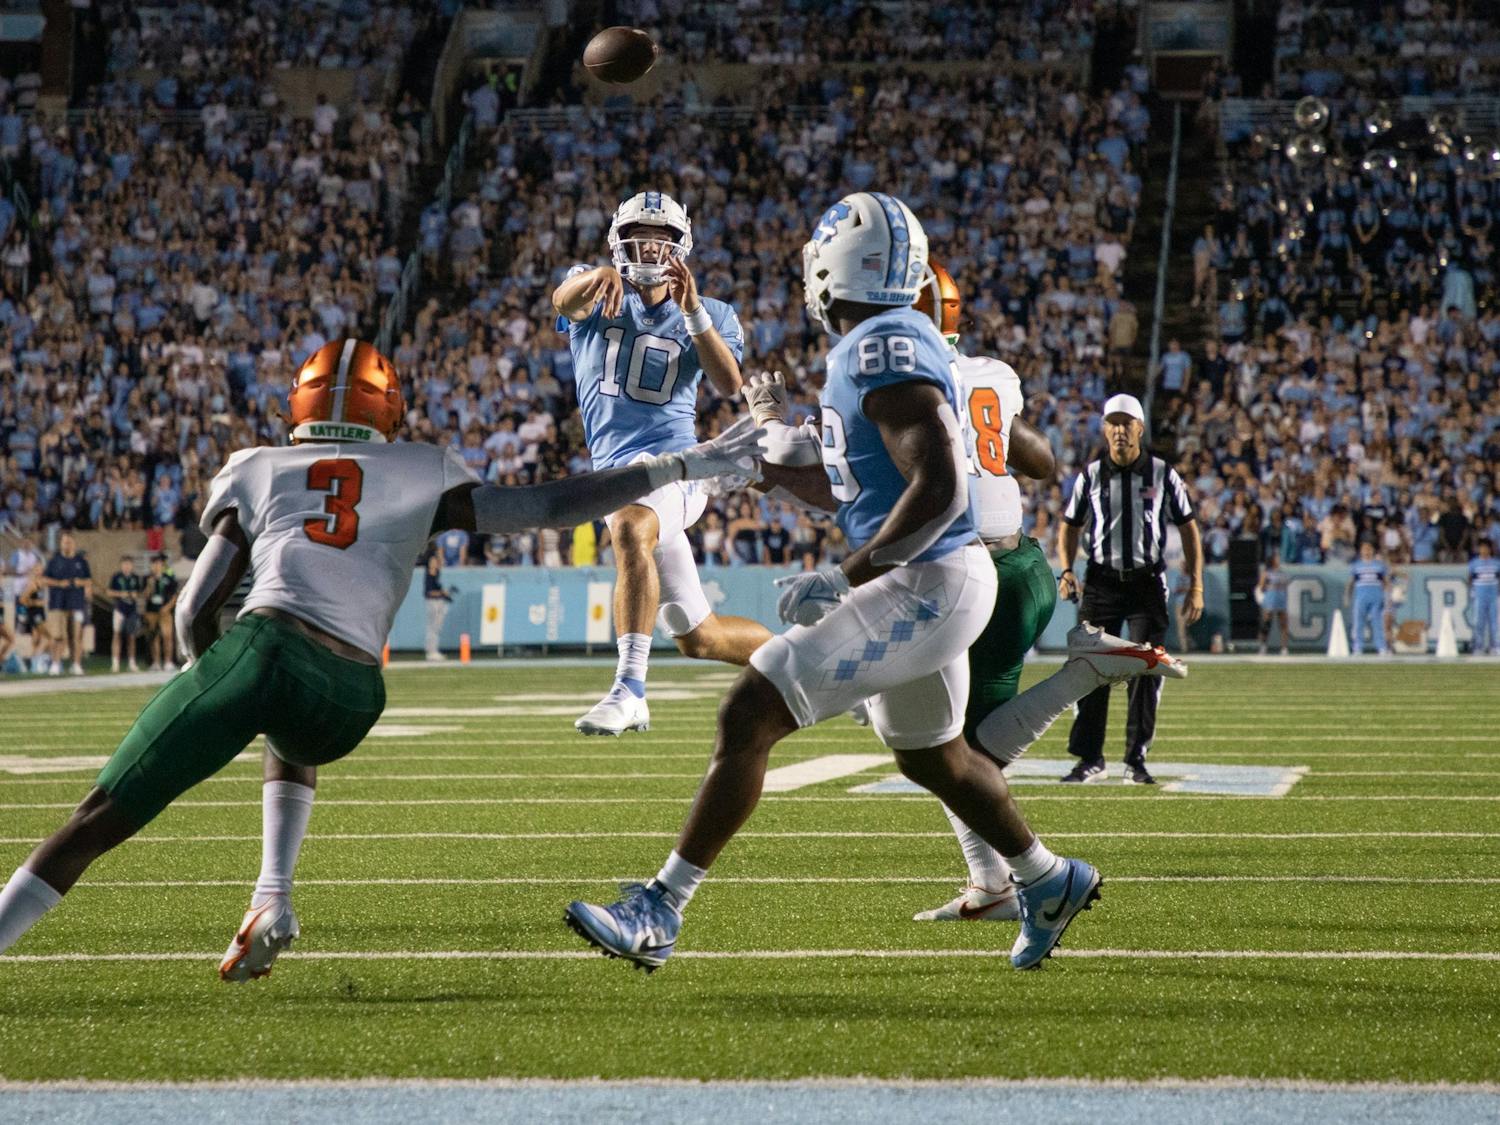 Freshman quarterback Drake Maye (10) throws the ball to graduate student tight end Kamari Morales (88) for a touchdown during UNC's opening game against Florida A&M at Kenan Stadium on Aug. 27, 2022. UNC won 56-24.